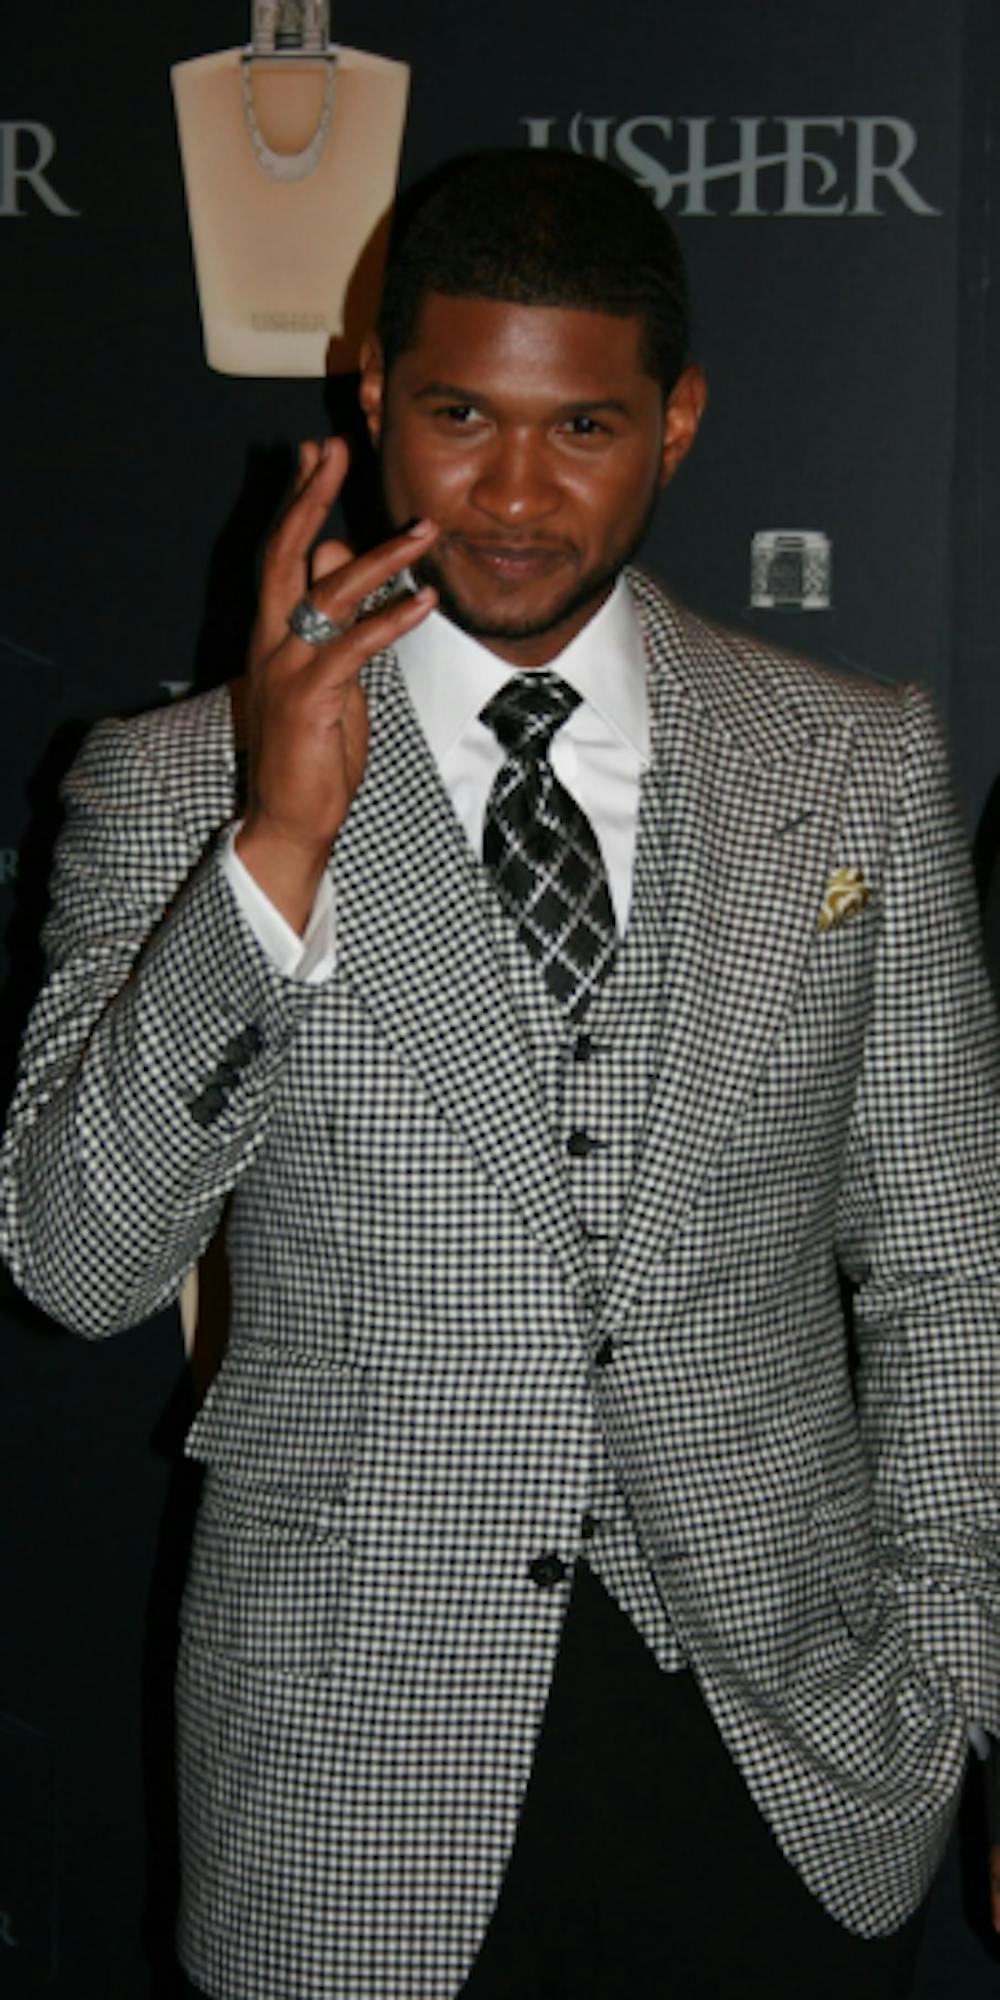 <p>Usher is an R&amp;B and pop singer known for his hit singles including “Nice &amp; Slow” and “You Make Me Wanna…” (Photo courtesy of <a href="https://commons.wikimedia.org/wiki/File:Usher_Ring.jpg" target="">Wikimedia Commons</a> / Ames Friedman, Sept. 25, 2007, CC BY 2.0).</p>